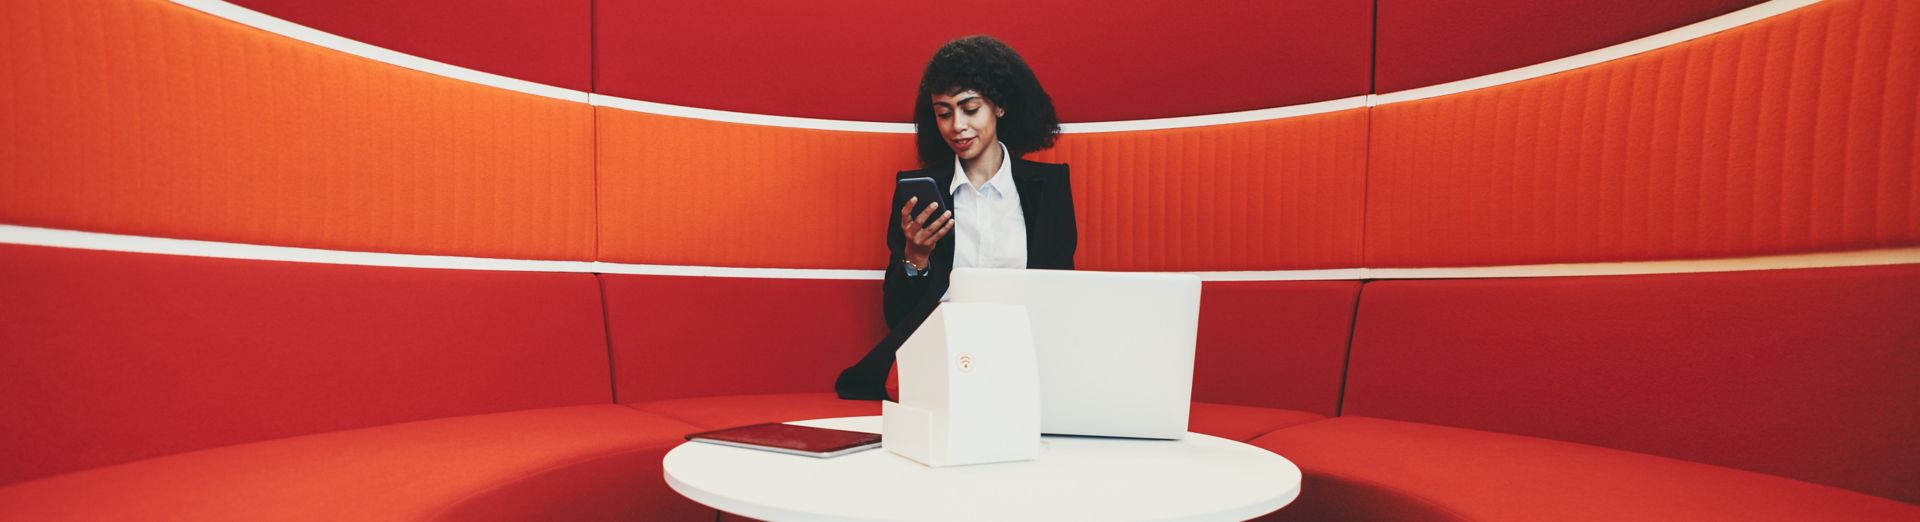 Woman sits in a bright red cubicle and works on laptop and phone.